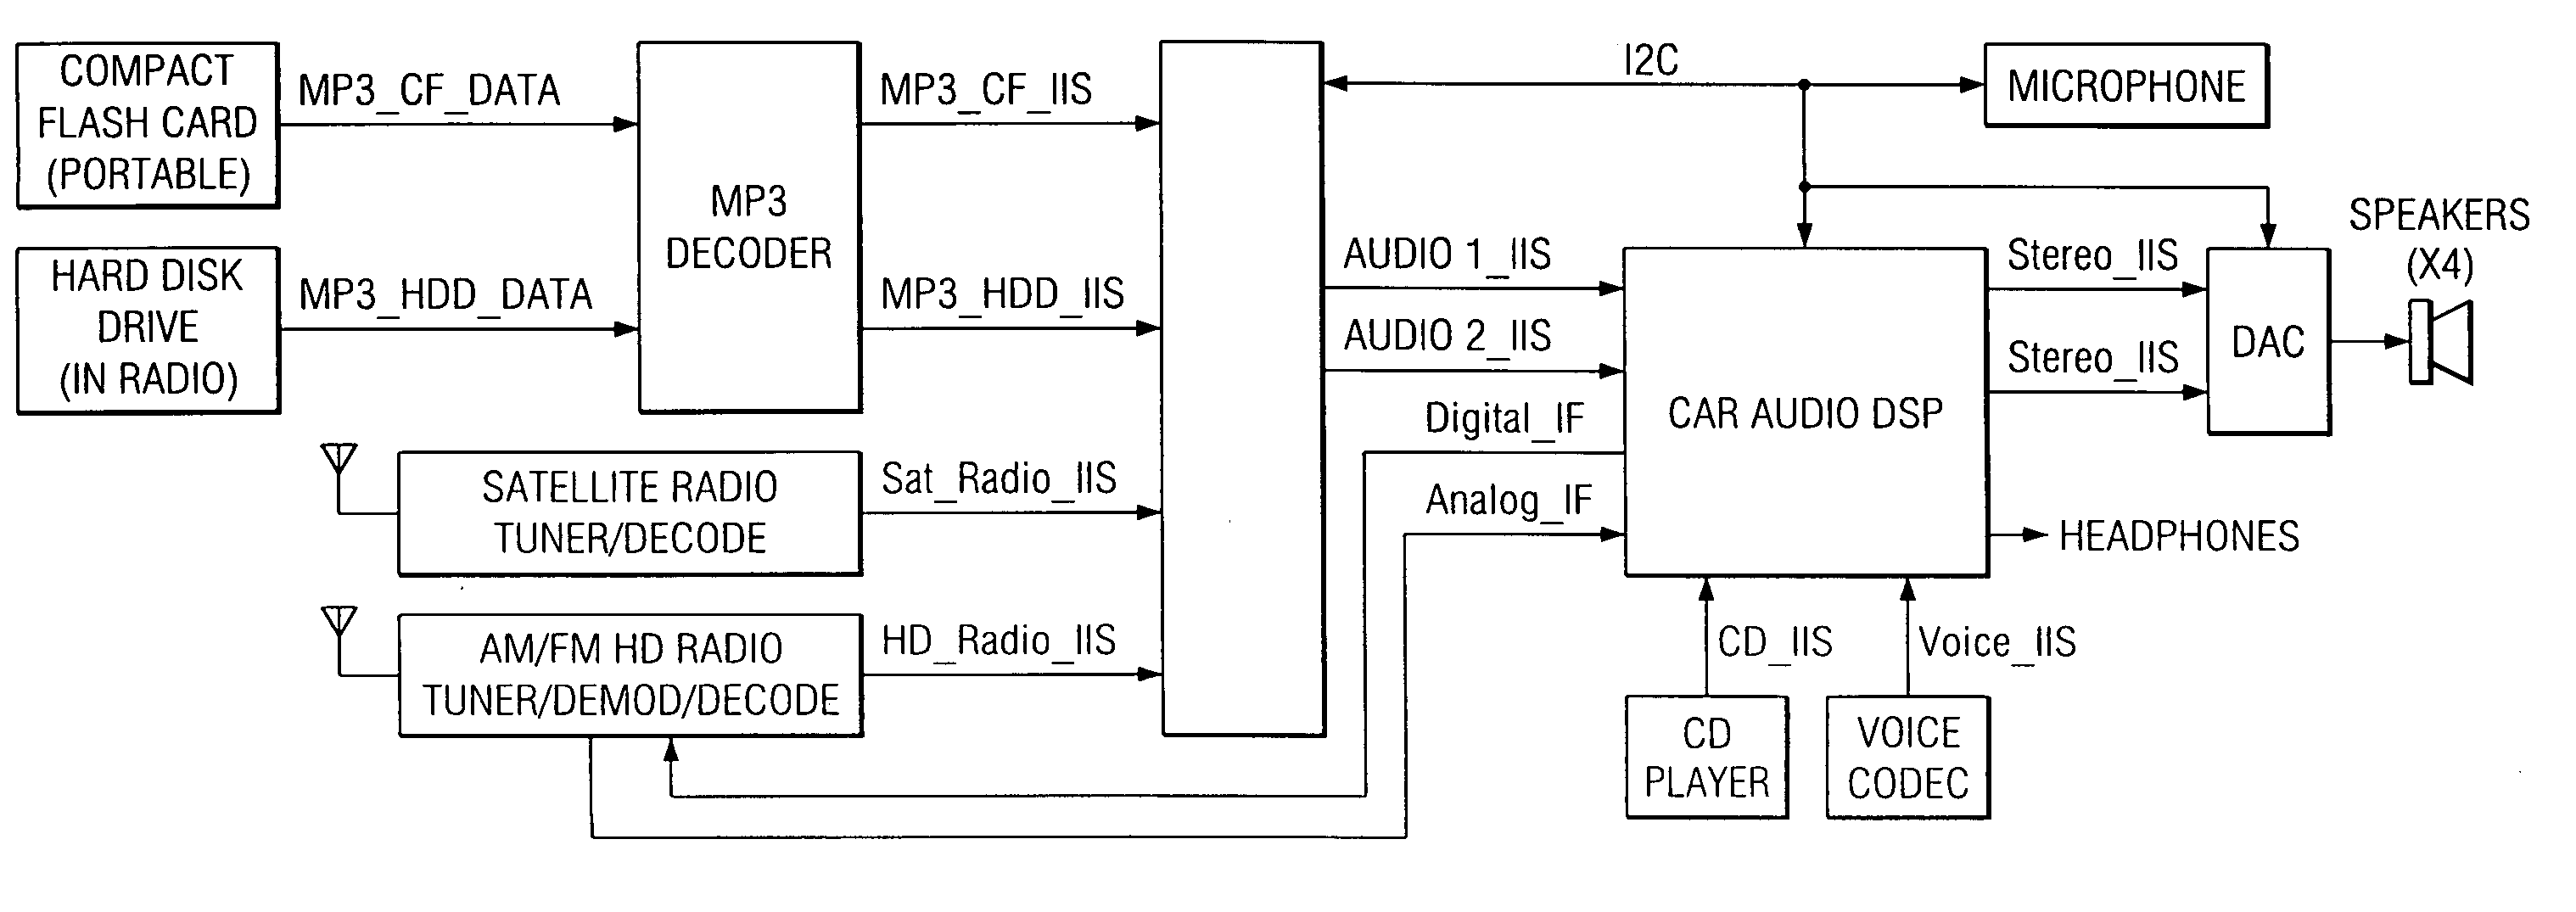 Monolithic digital audio bus switch with output control